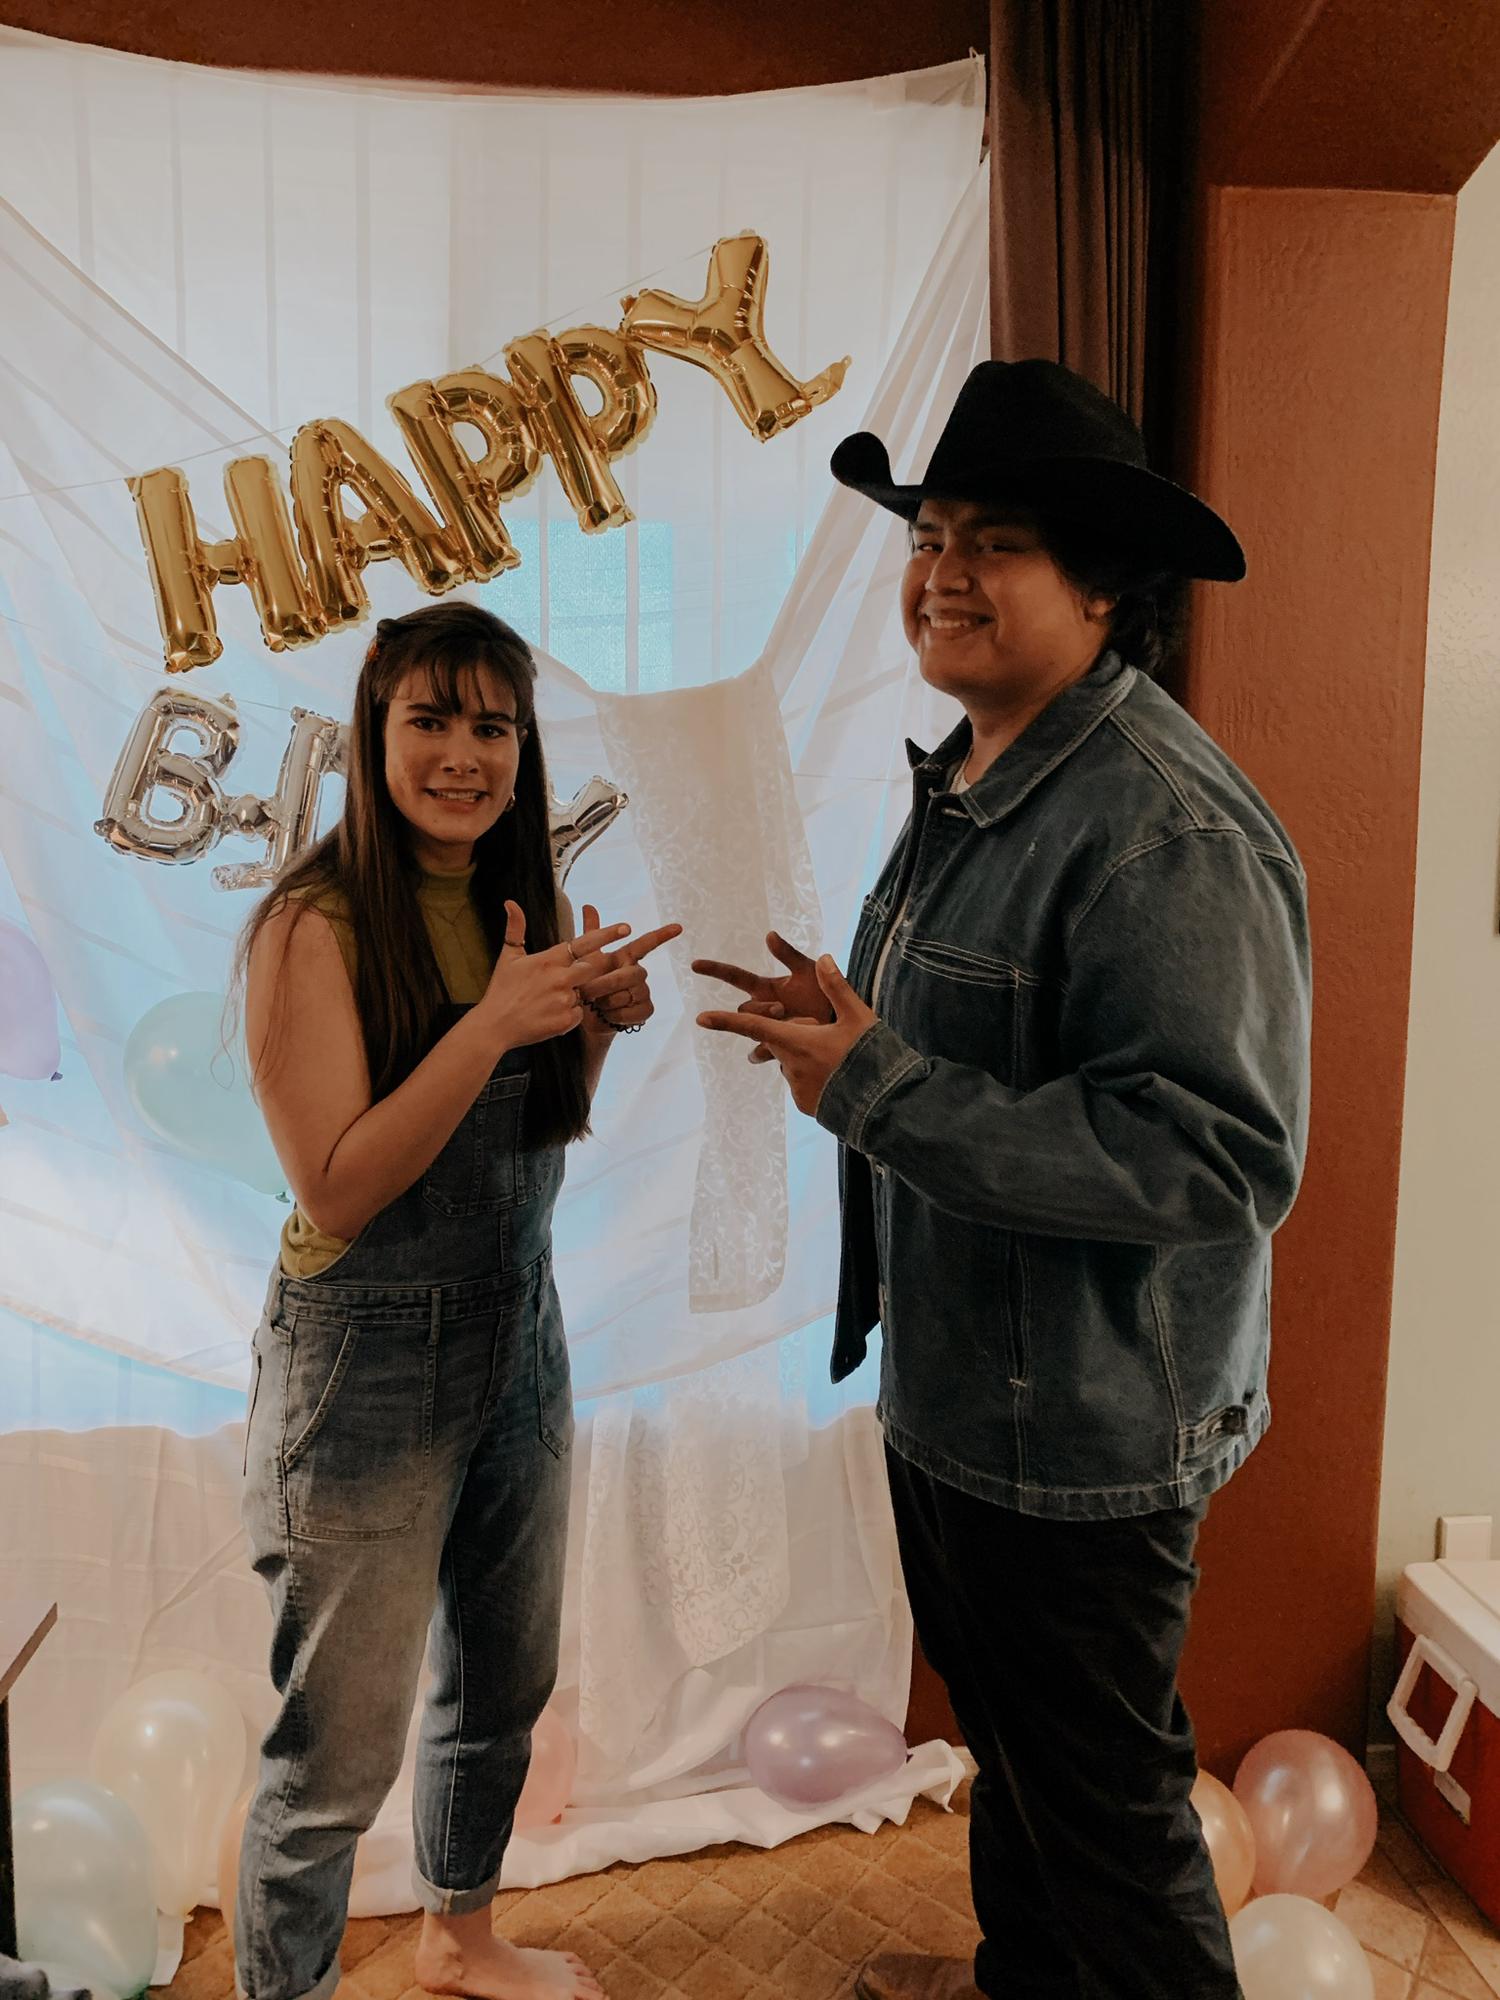 Favian always loves giving Elli a hard time, so when he found out she doesn't like country, he crashed her birthday party wearing his boots and hat to show her what she's getting herself into!!!